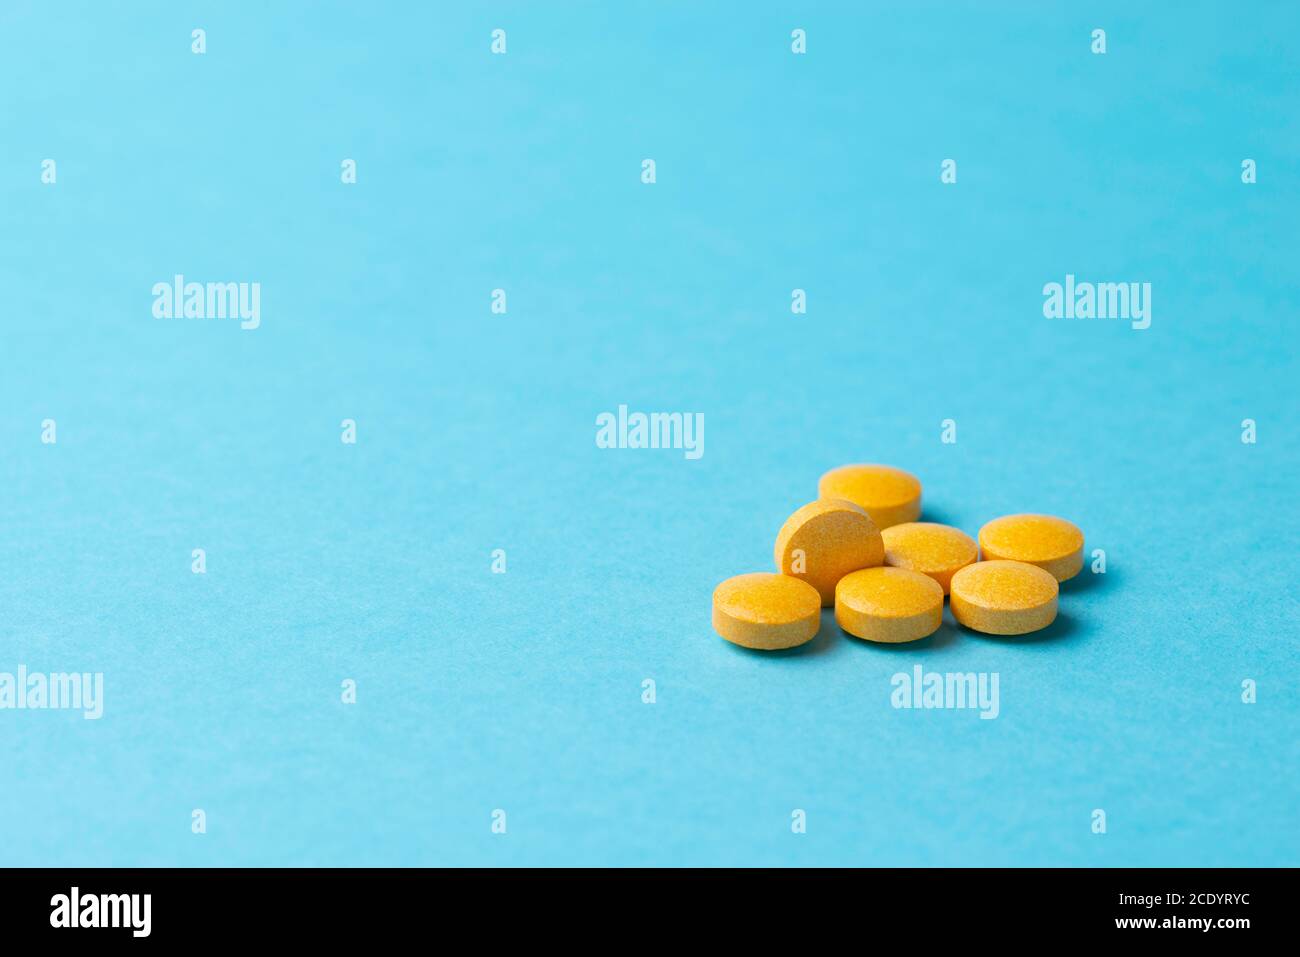 Medicines, tablets on a blue background. Stock Photo